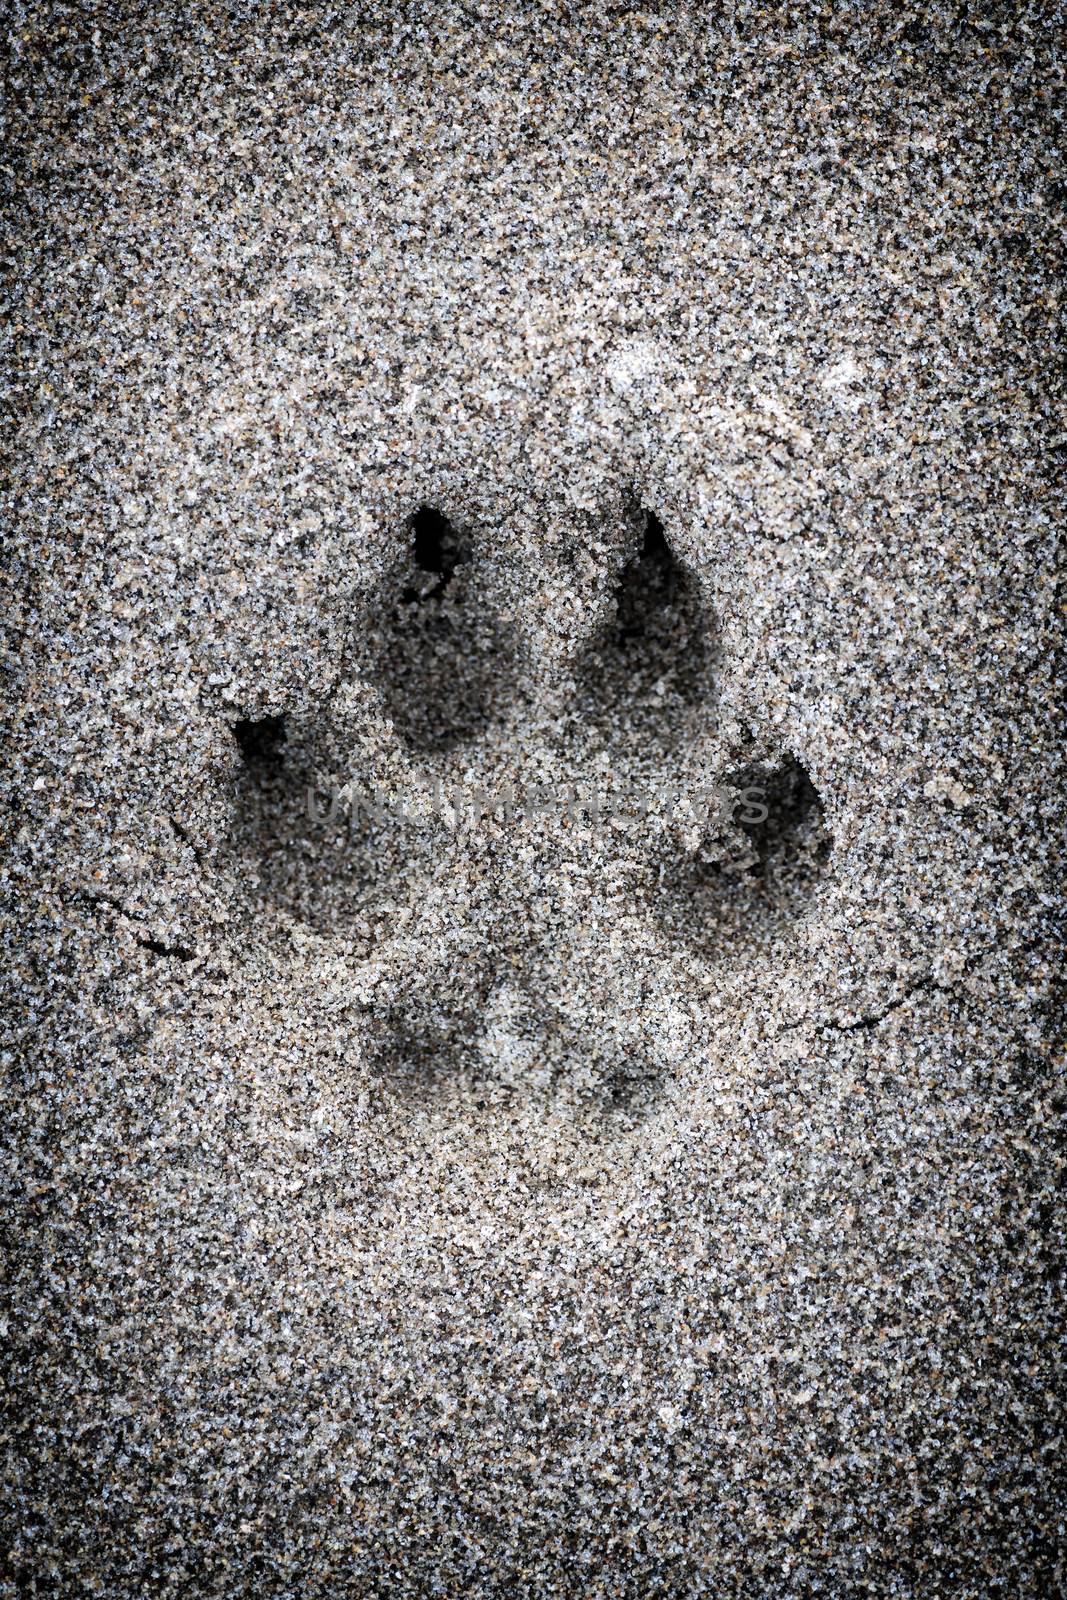 Paw print in sand by elenathewise